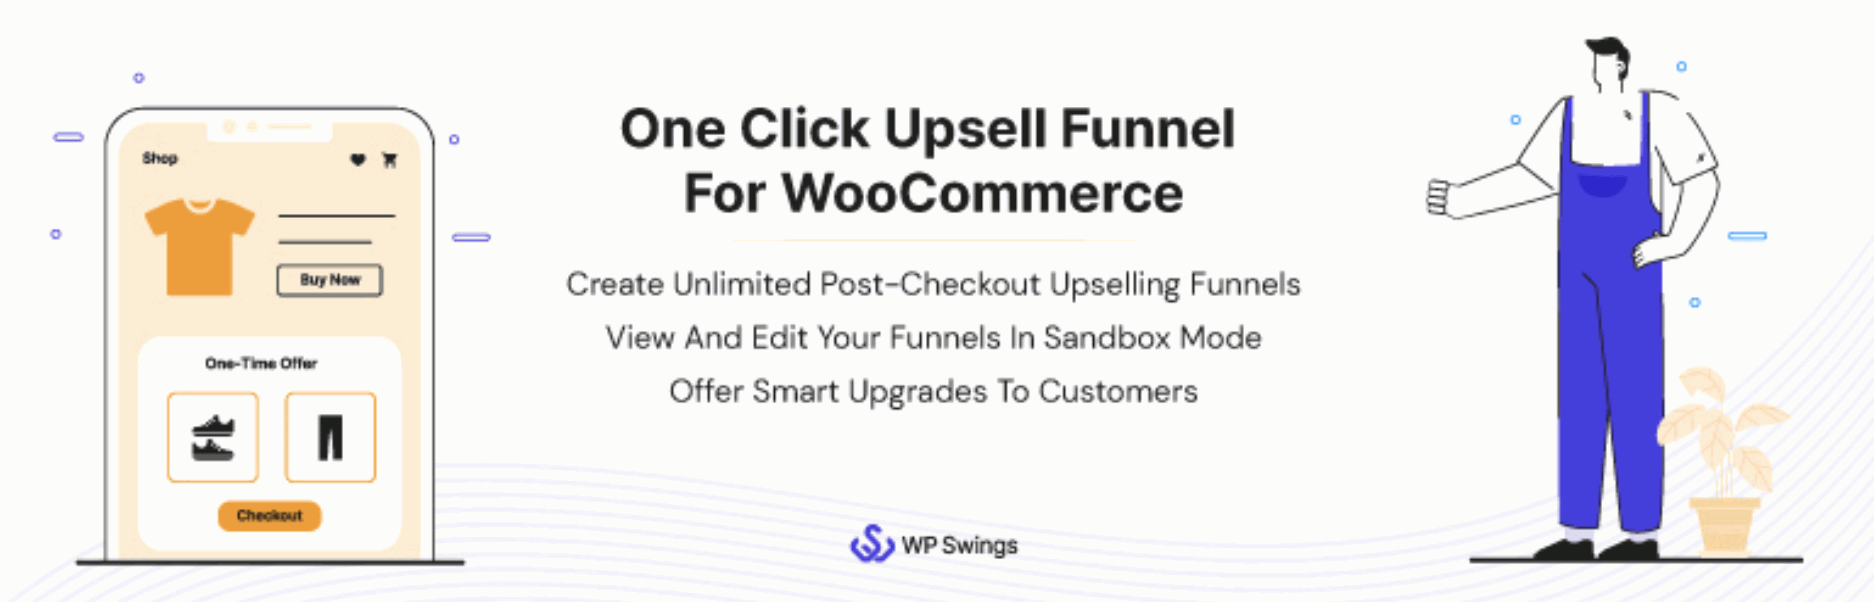 One Click Upsell Funnel for WooCommerce 